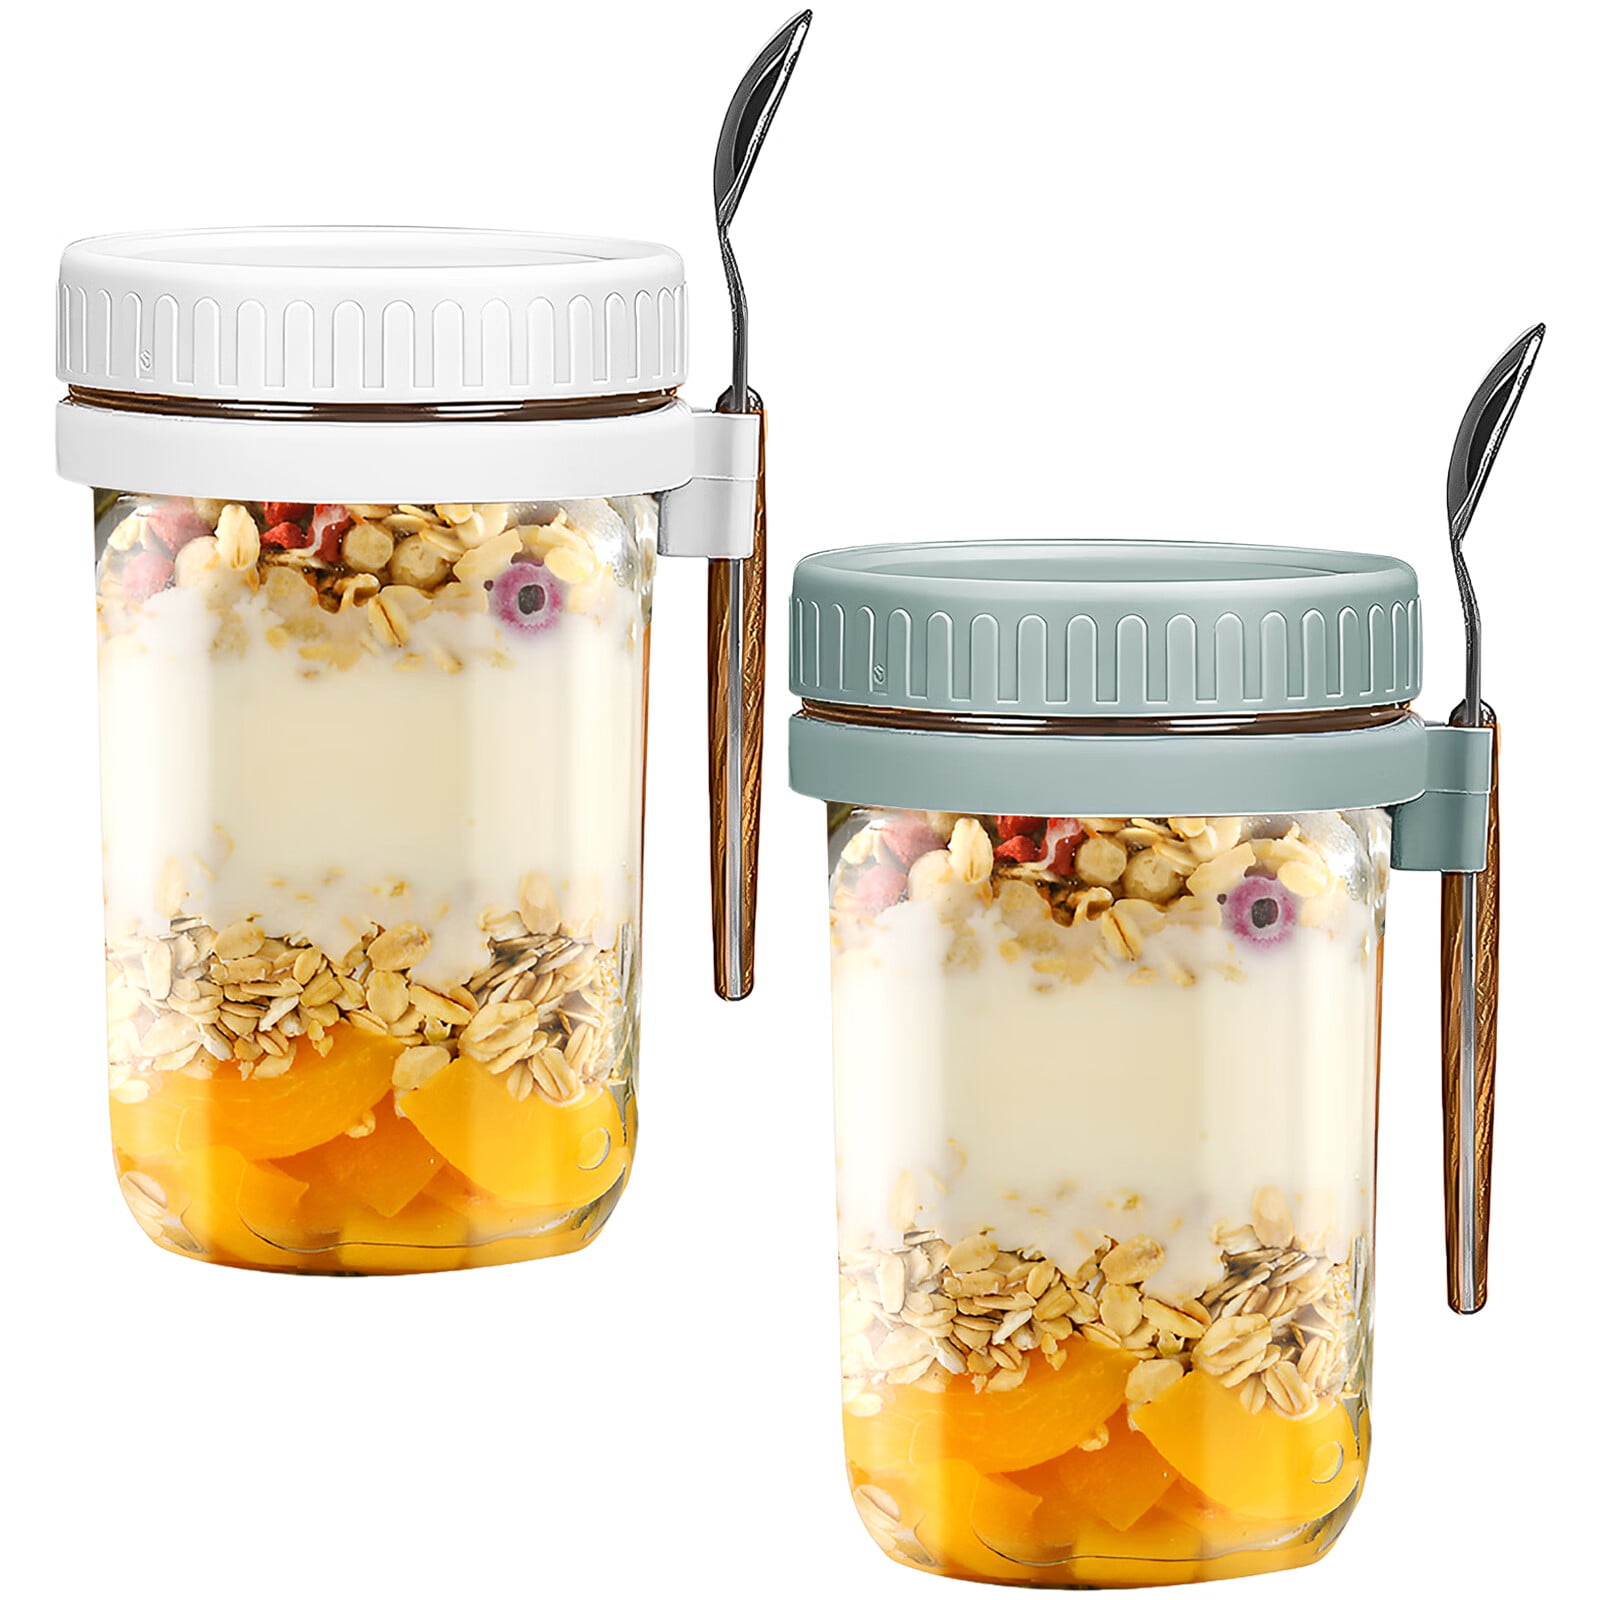 RTWDKFQ 2Pack Overnight Oats Containers With Lids and Spoons,16-Oz Glass  Mason Jars Oatmeal Container, Leak-Proof Meal Prep Jars for Milk,  Vegetable